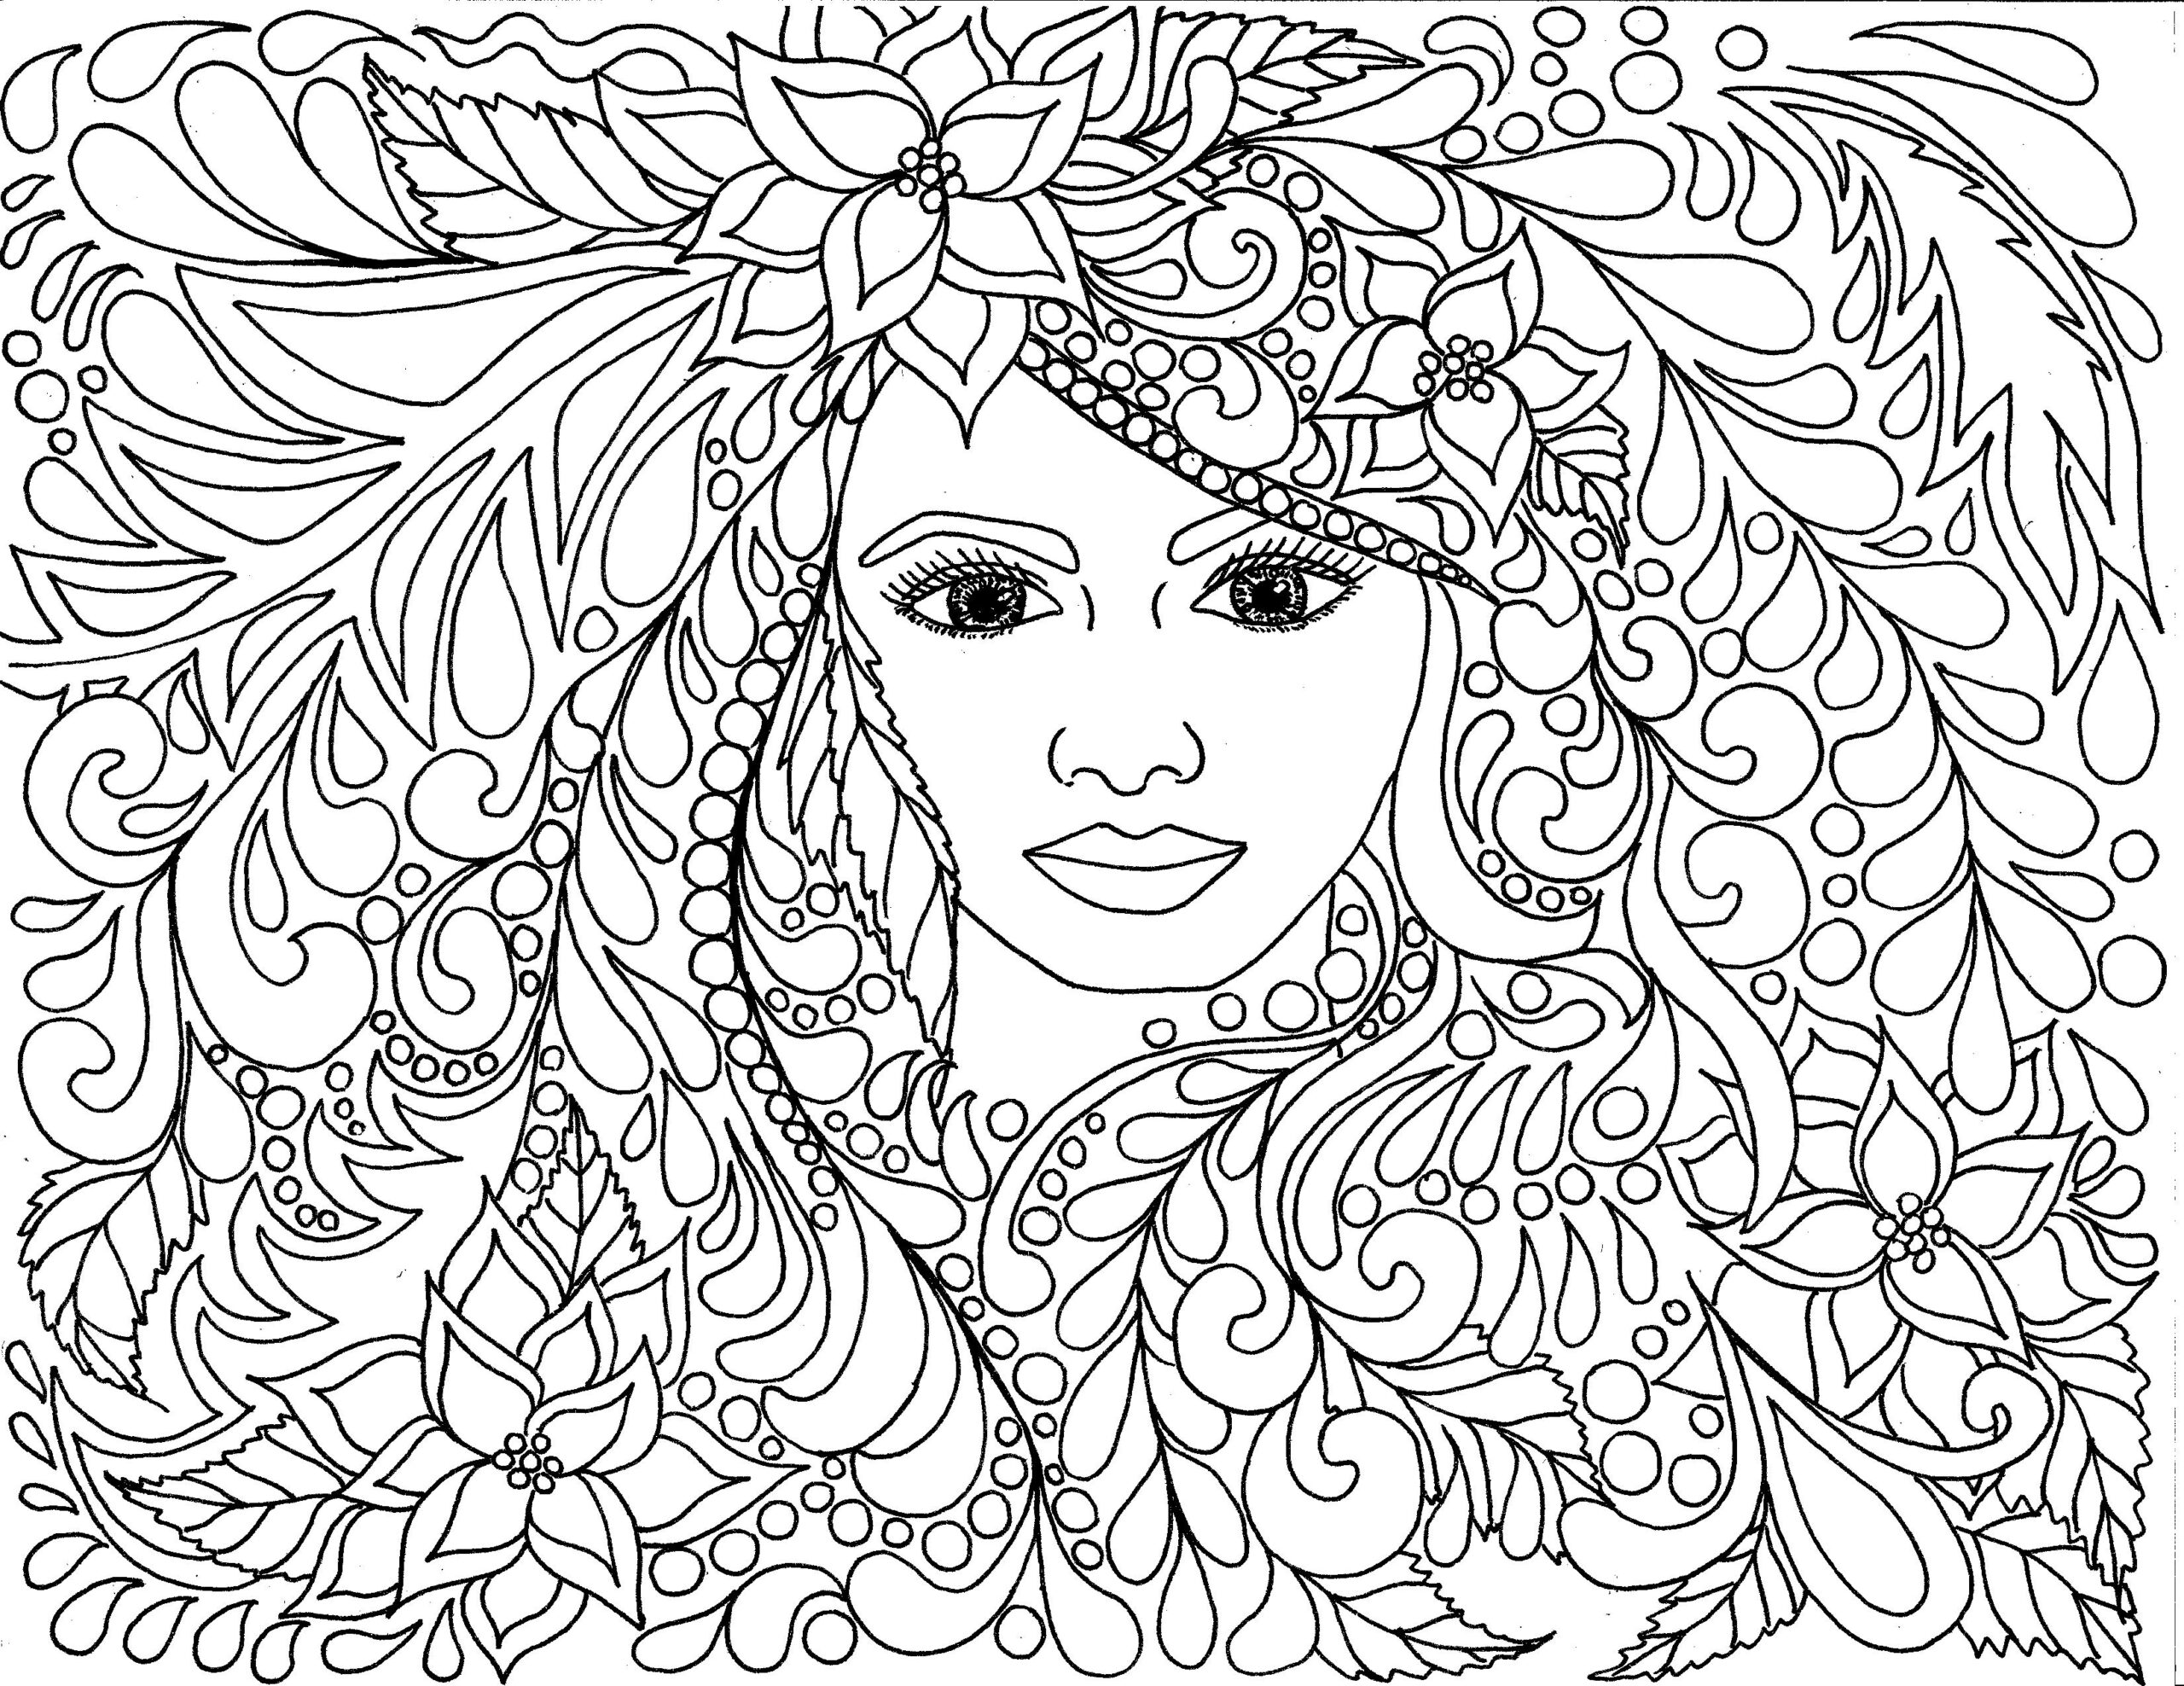 2022 coloring pages